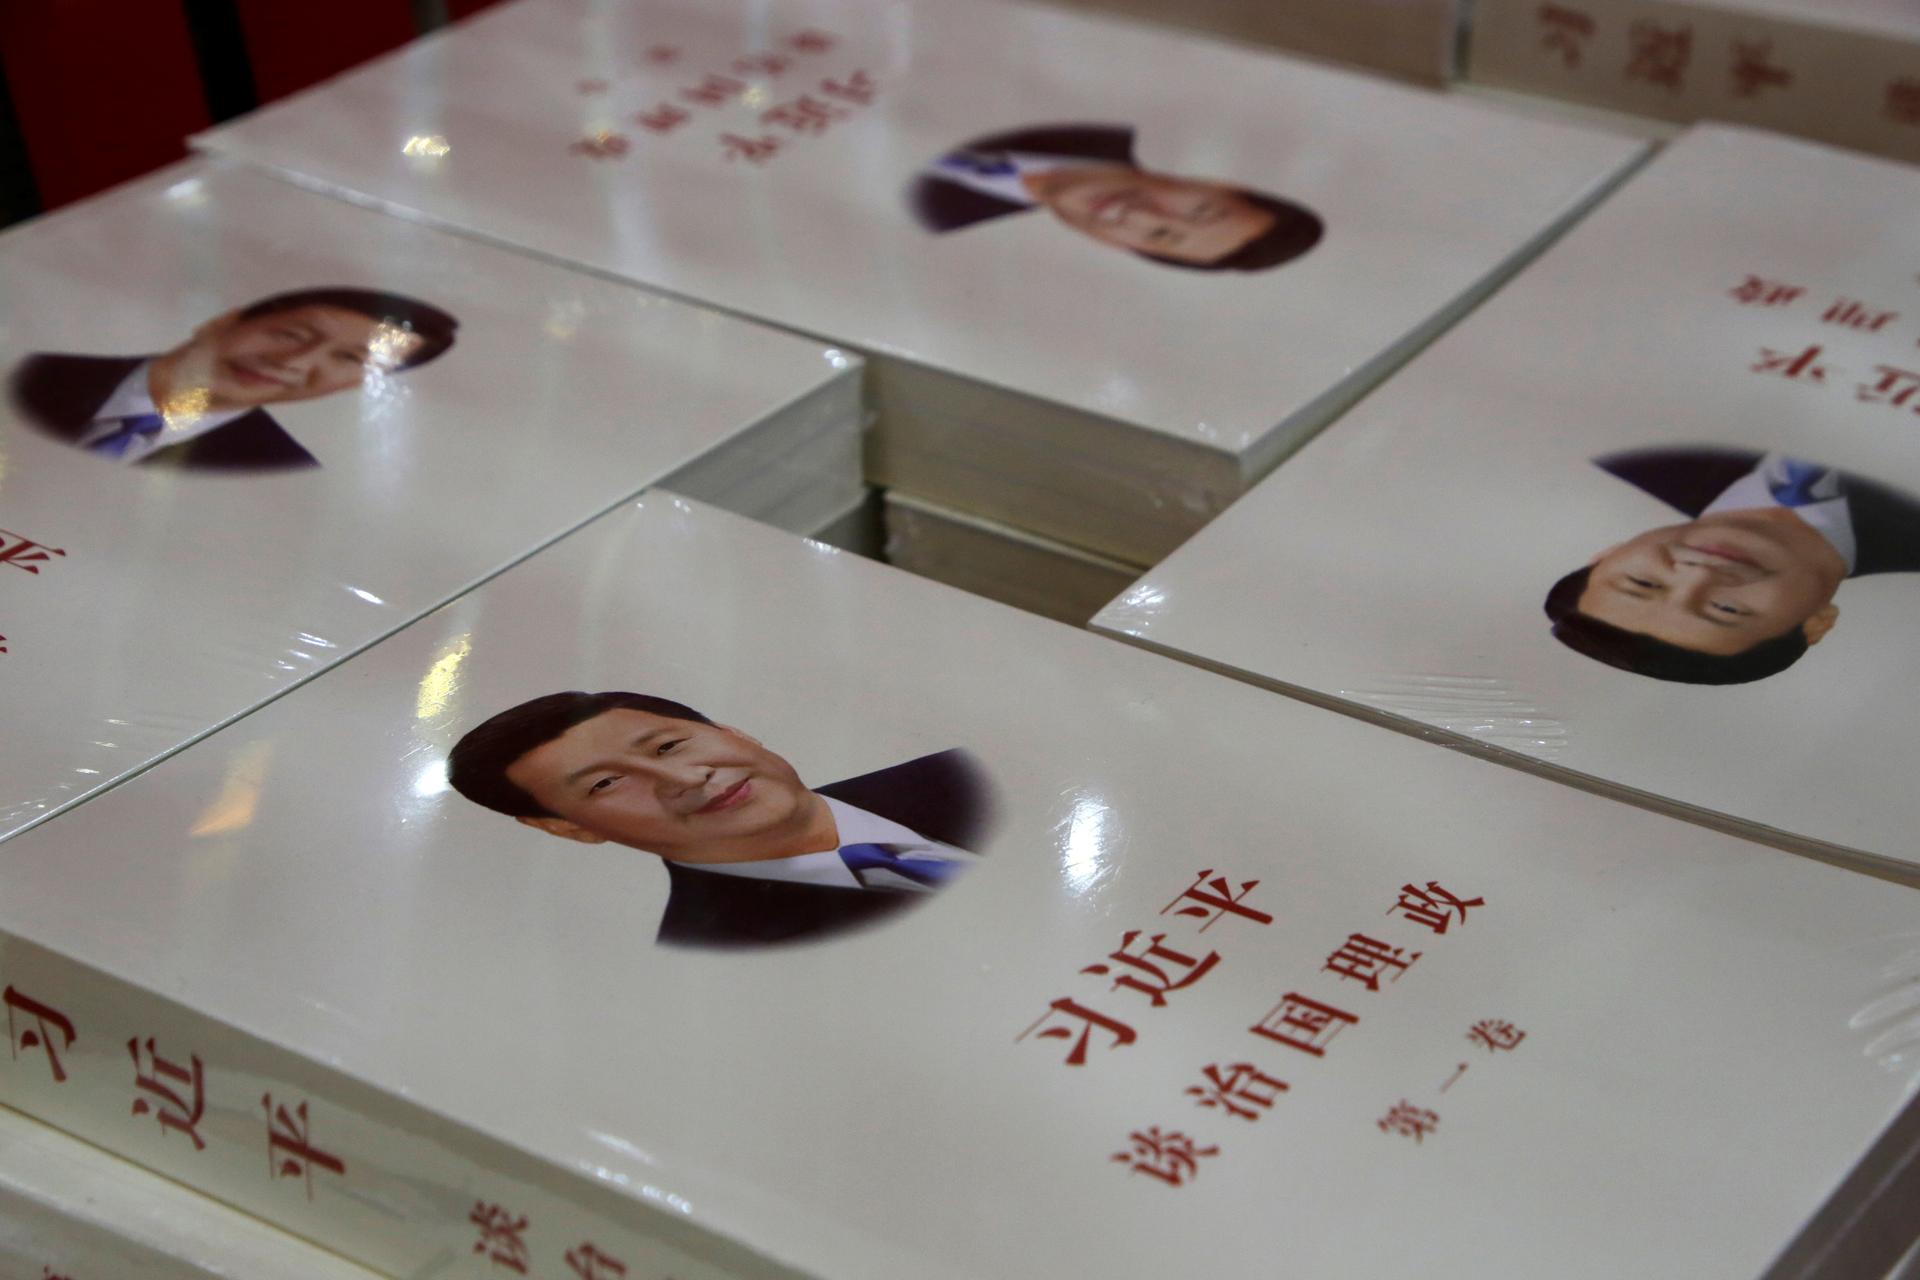 Copy of books with president's face